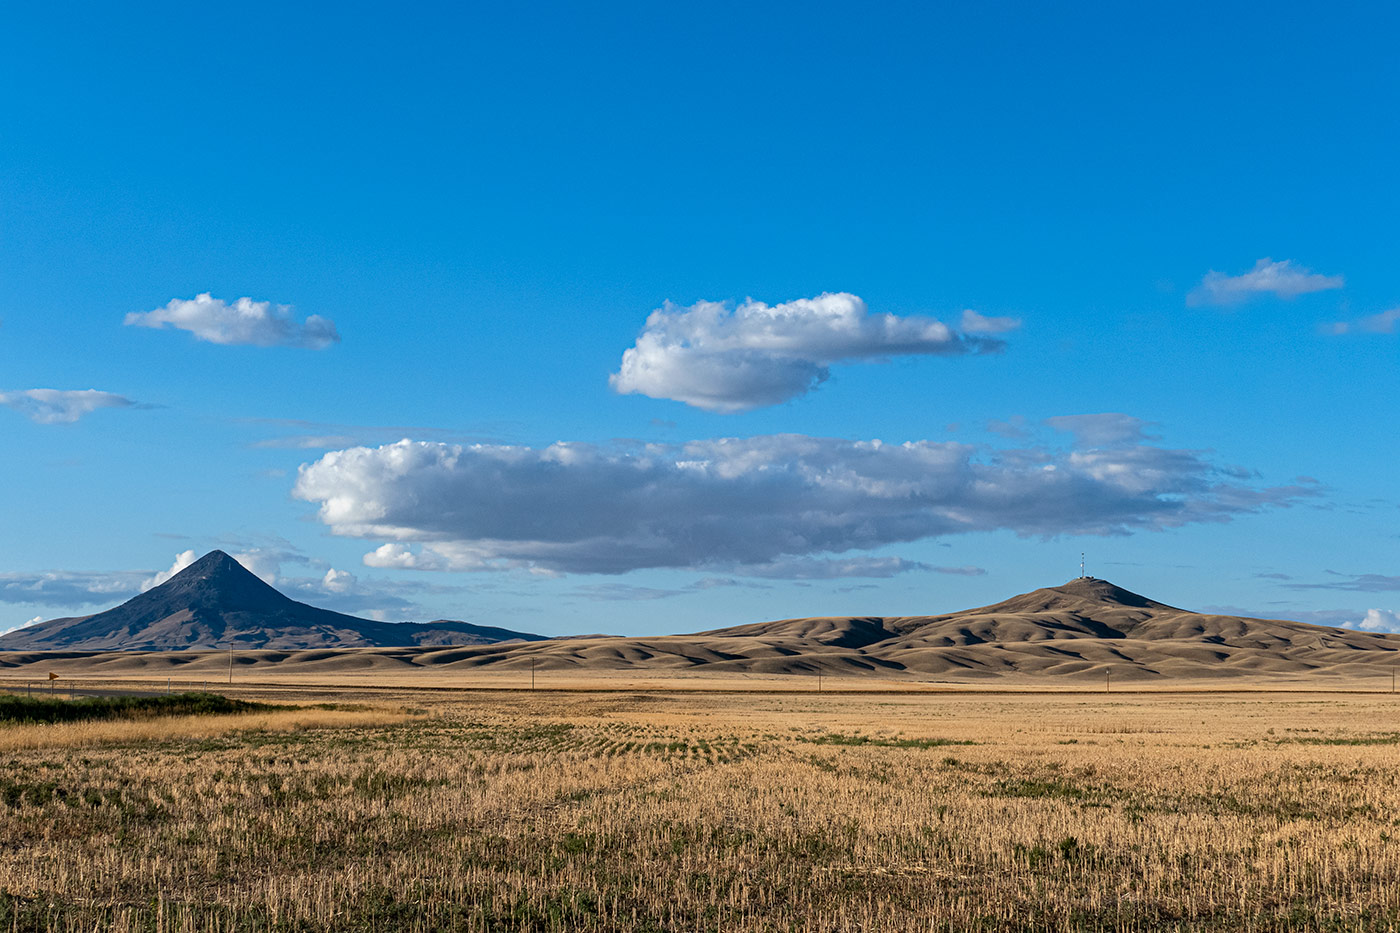 Gold Butte (center butte) and Grassy Butte to the right - looking north, Sweet Grass Hills